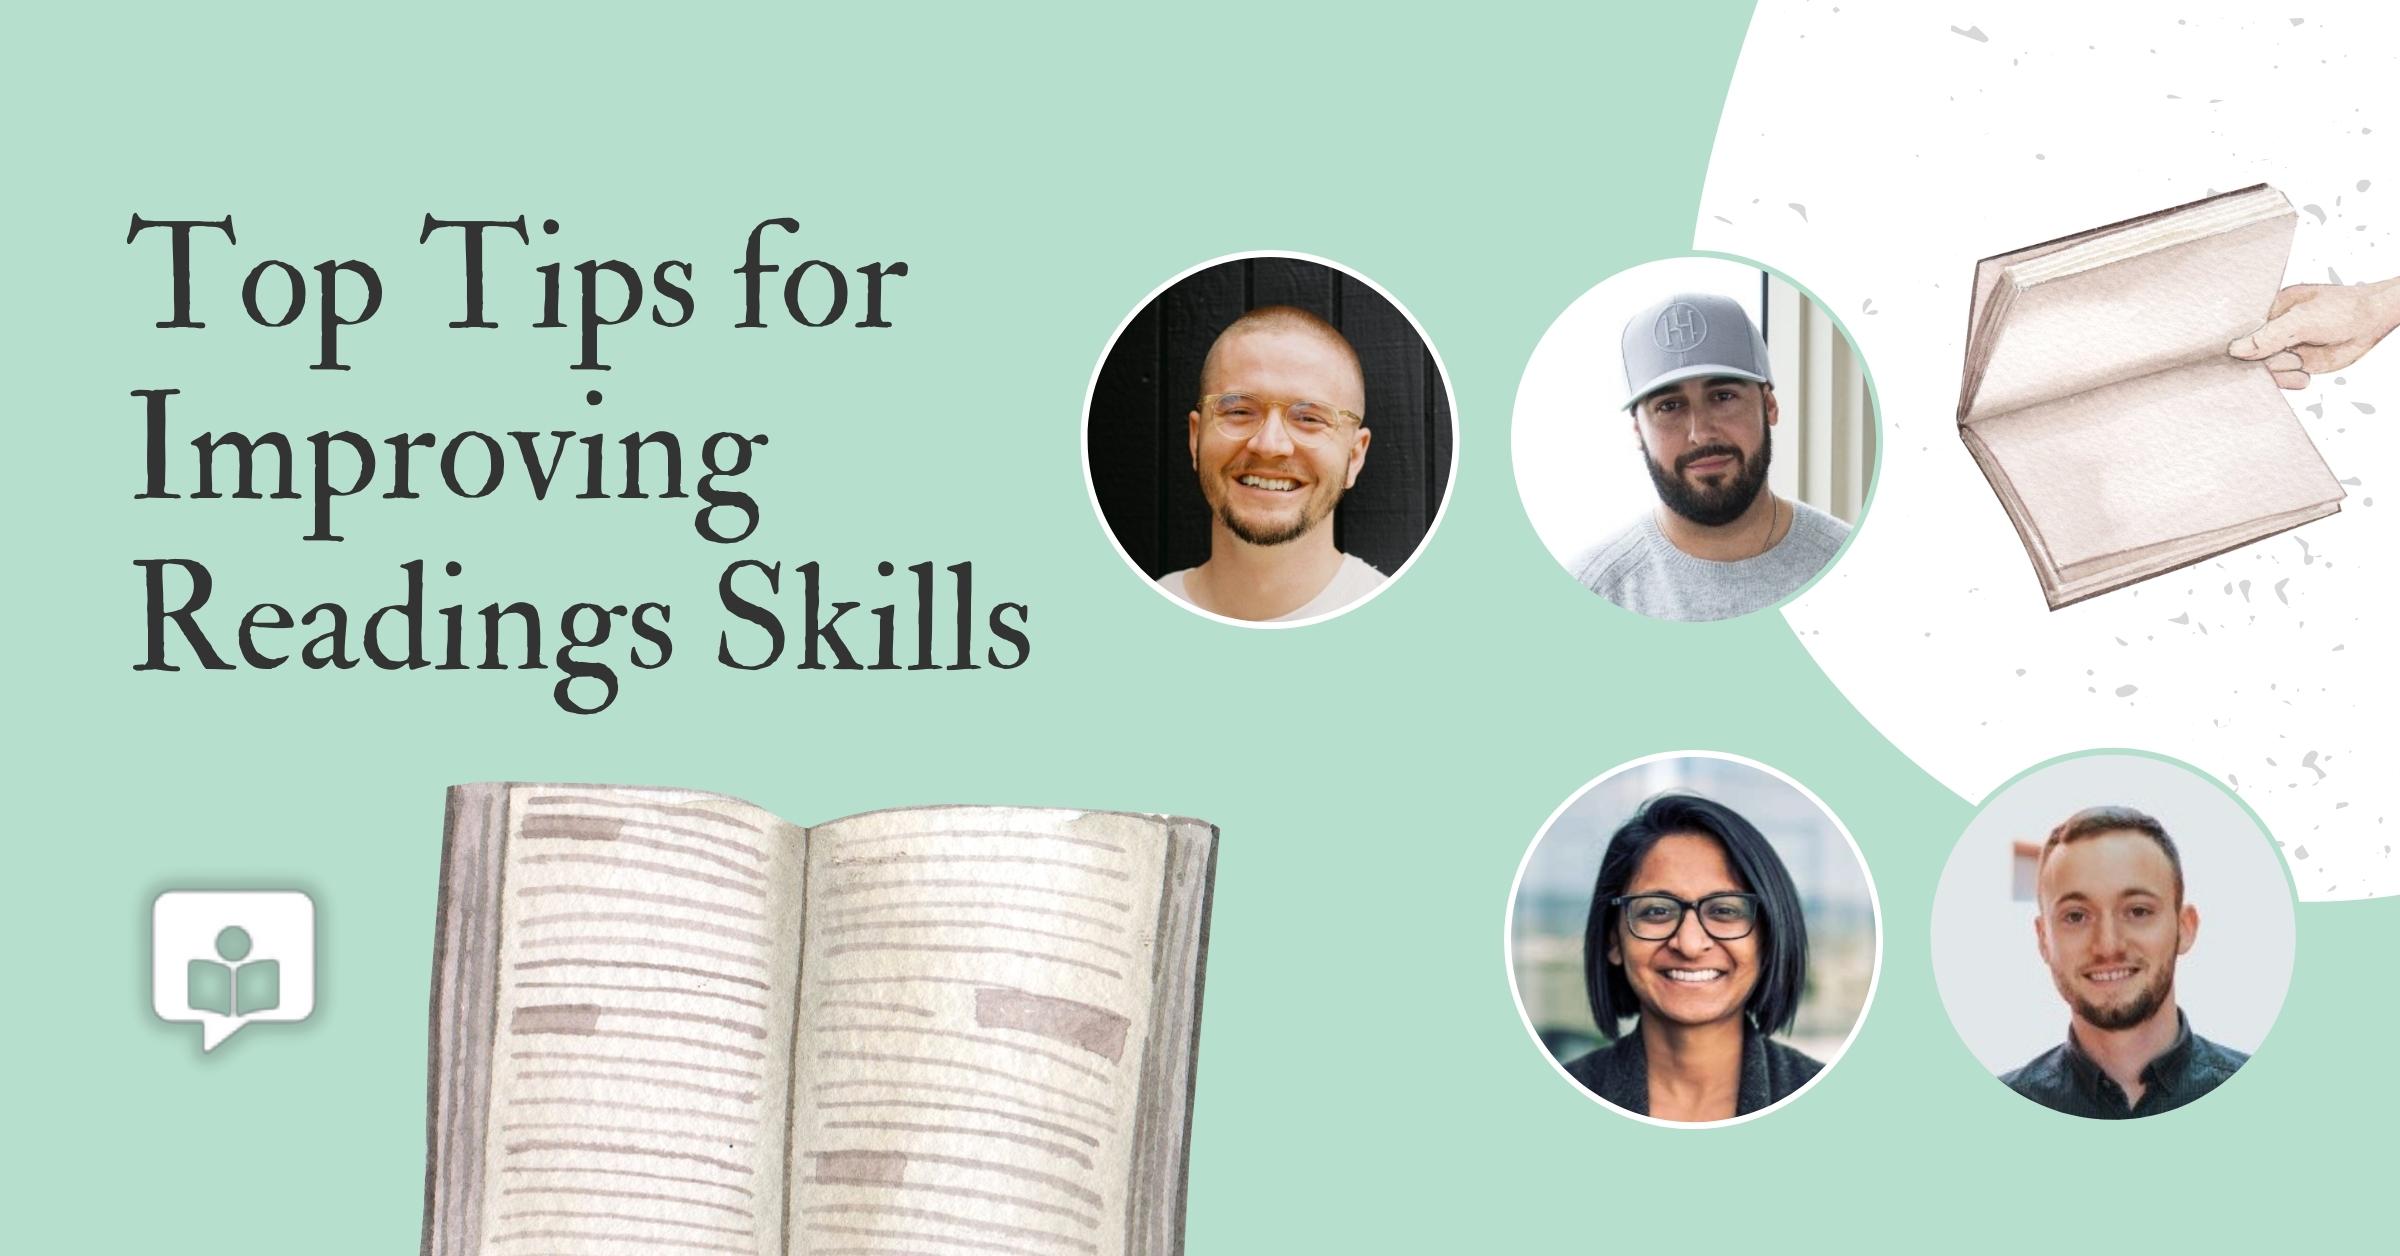 Top Tips for Improving Readings Skills